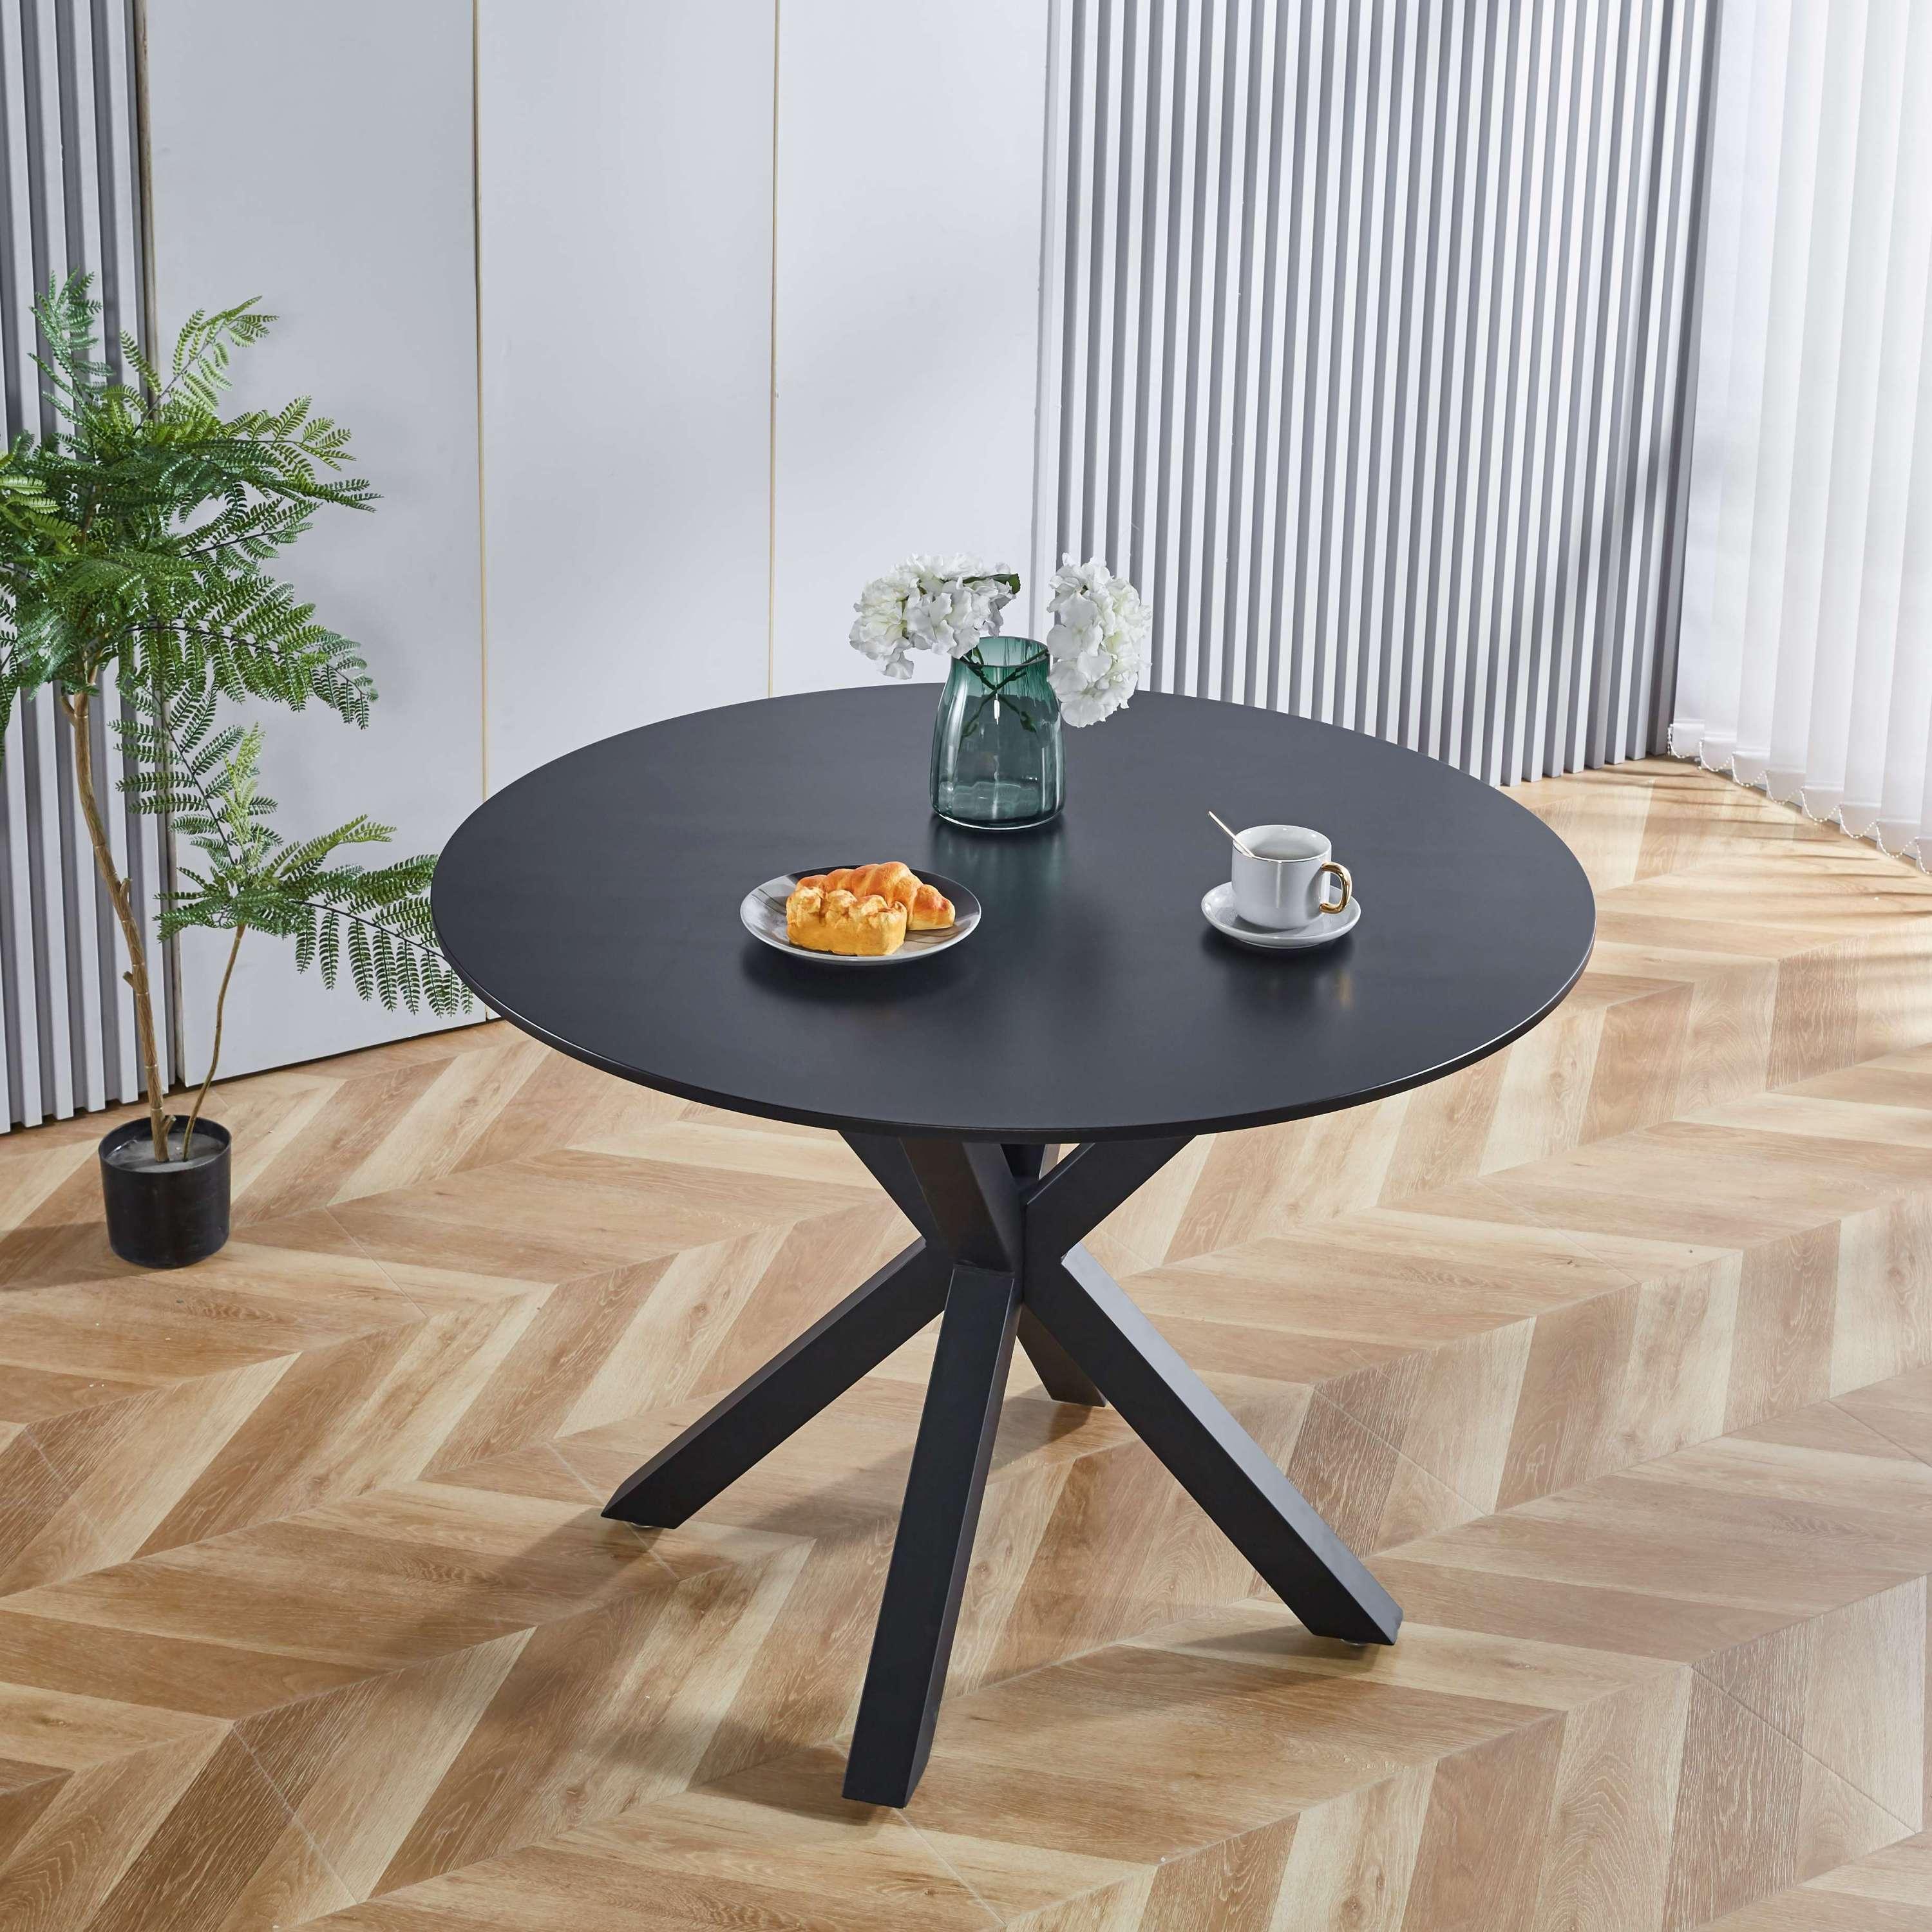 🆓🚛 5 Pcs Dining Set, 1 Round Mid-Century Dining Table With Mdf Table Top, 4 Black Chairs